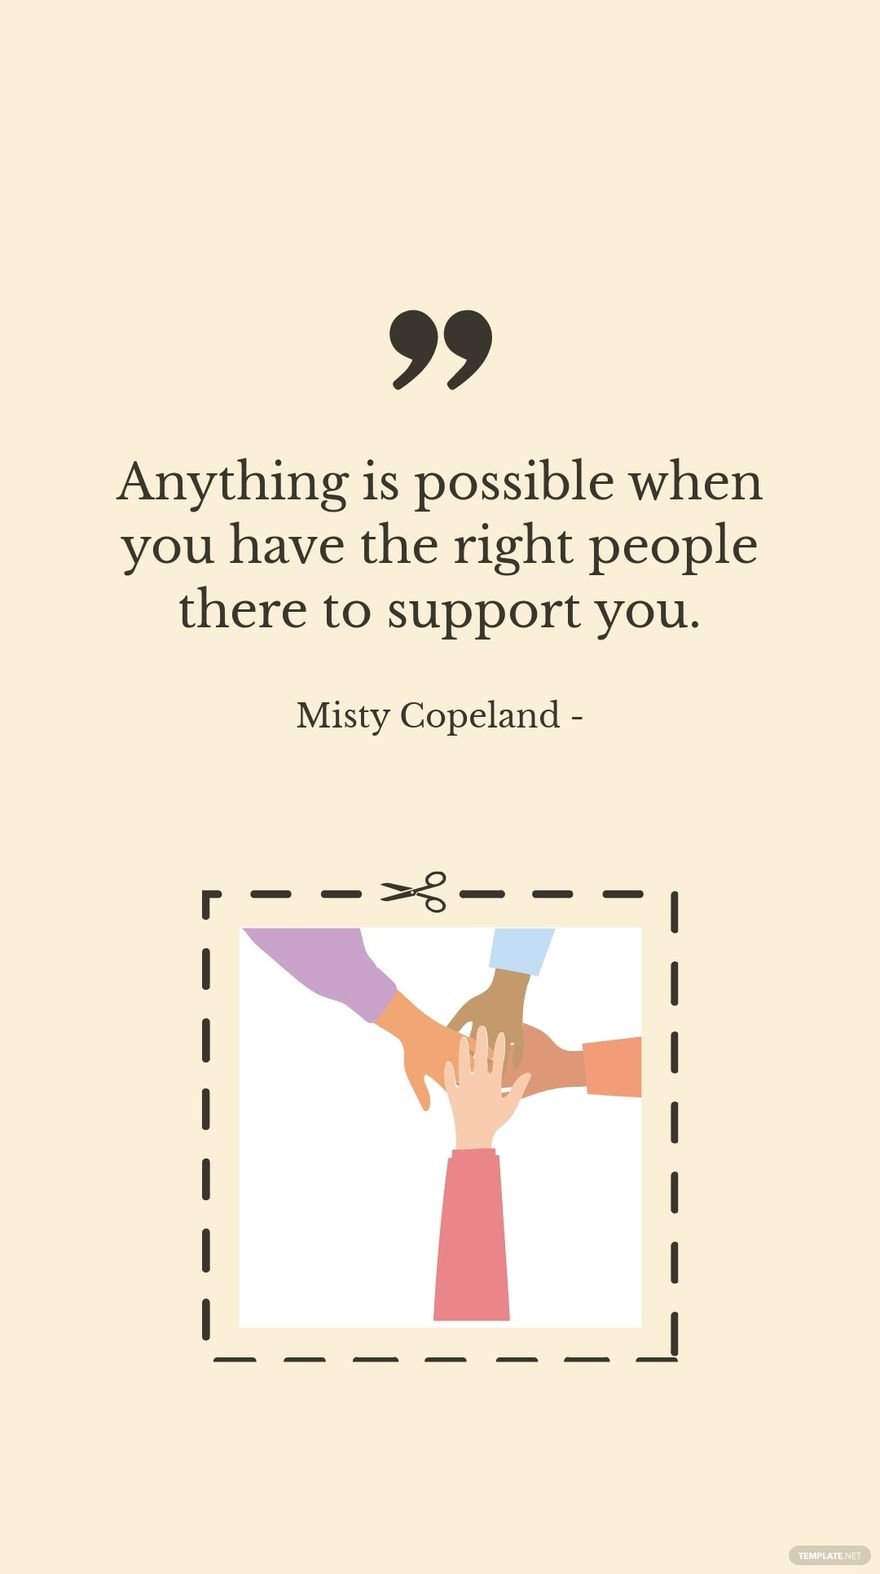 Misty Copeland - Anything is possible when you have the right people there to support you. in JPG